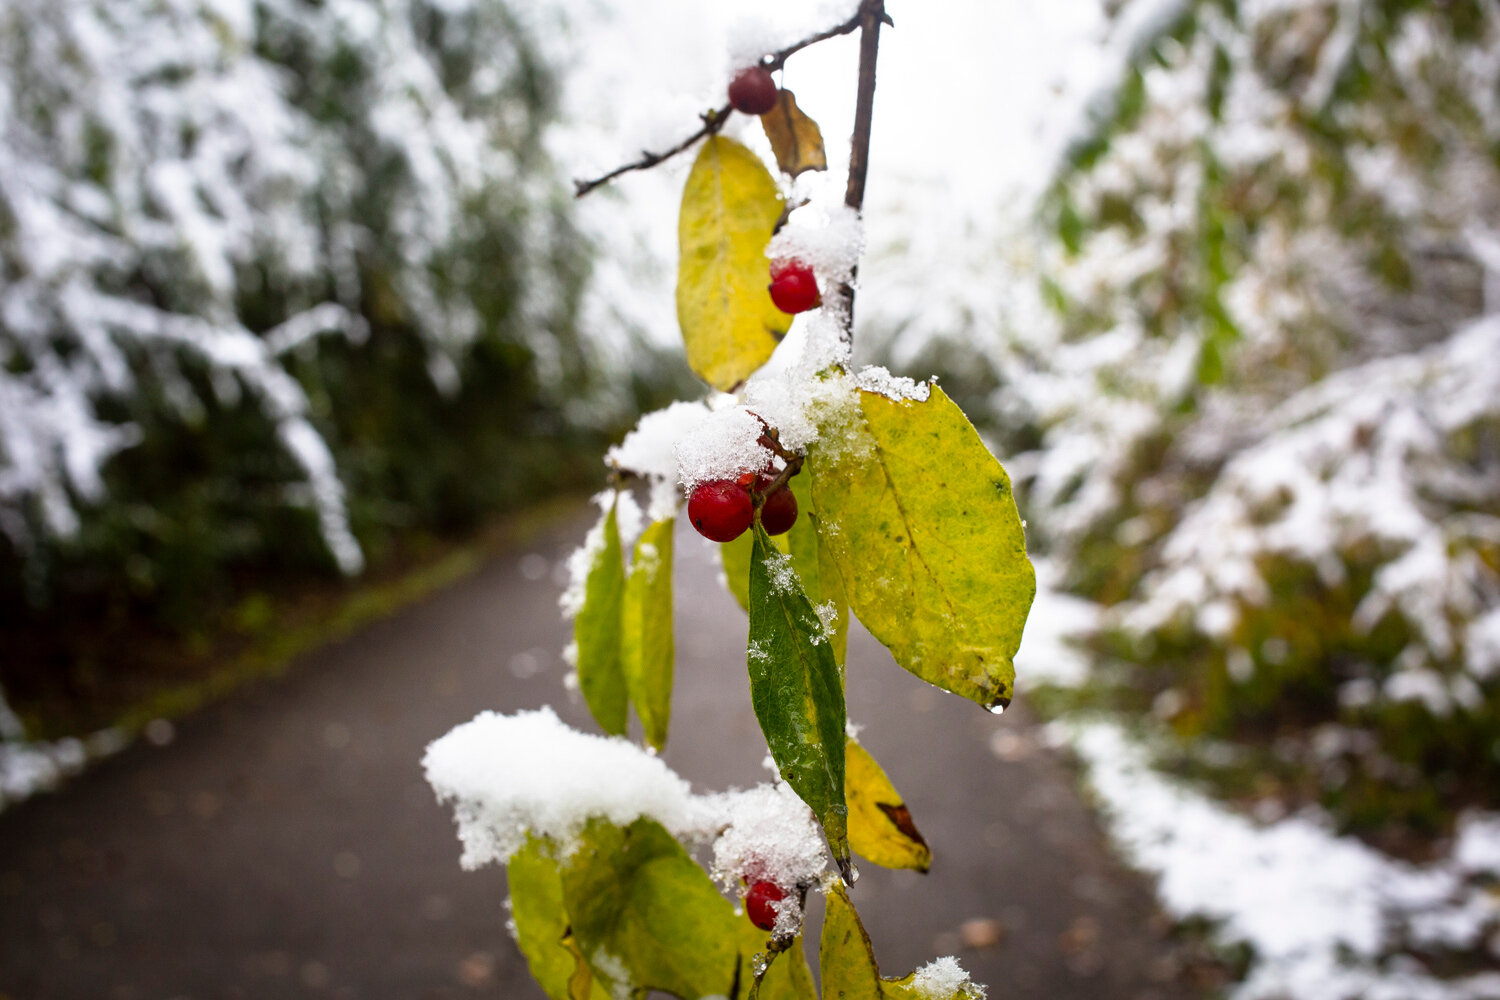  Coated with snow, the fruit of a honeysuckle bush hangs over the Interurban Trail Friday, Nov. 9, 2018 in Springfield, Ill. [Rich Saal/The State Journal-Register] 